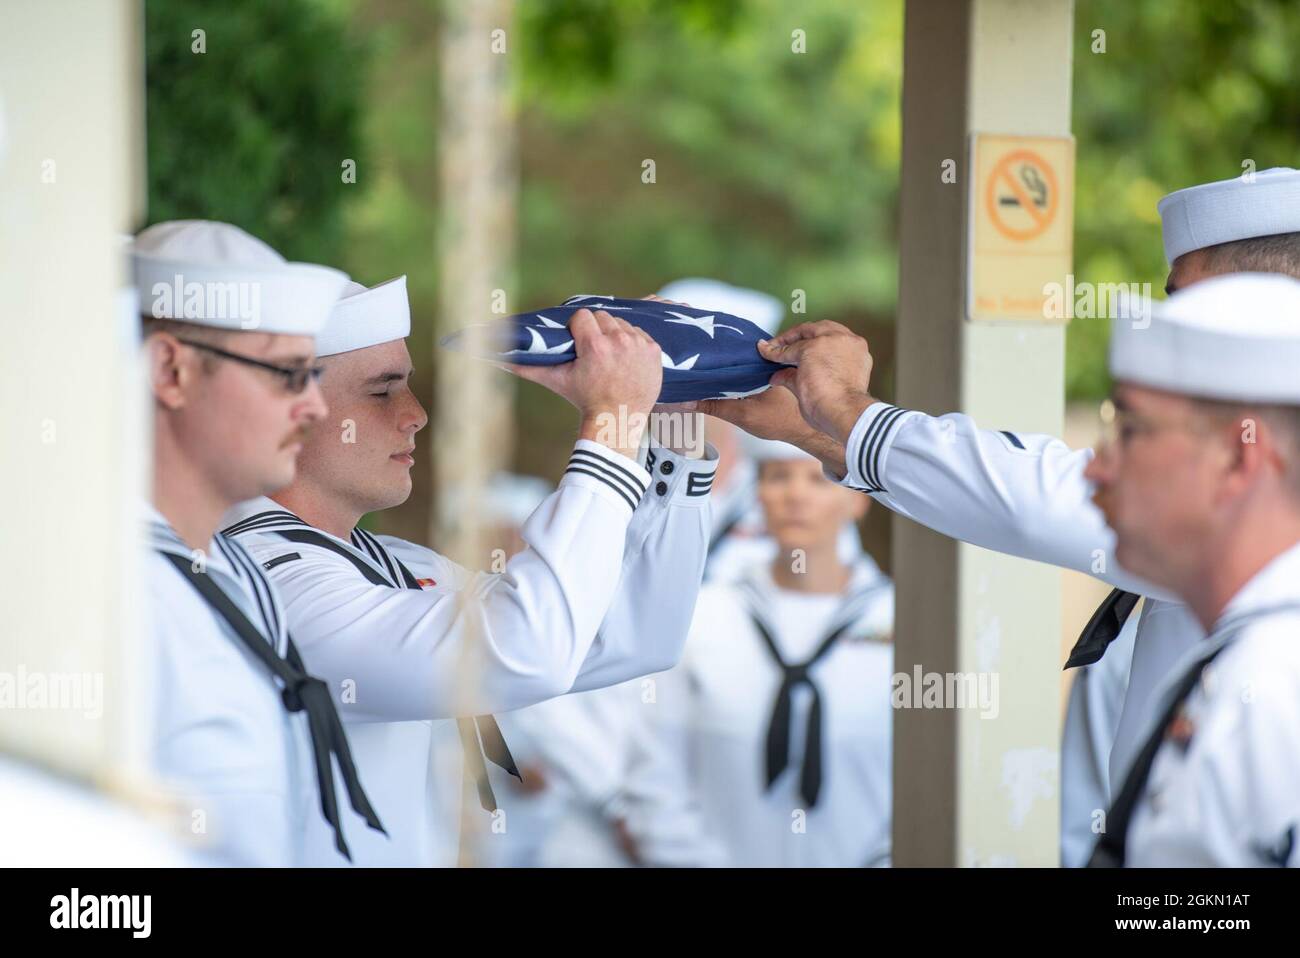 The Navy Region Hawaii Honor Guard folds the flag during a funeral for U.S. Navy Gunner’s Mate 3rd Class Shelby Treadway, 25, of Manchester, Kentucky, at the National Memorial Cemetery of the Pacific, Honolulu, Hawaii, June 2, 2021. Treadway was assigned to the USS Oklahoma, which sustained fire from Japanese aircraft and multiple torpedo hits causing the ship to capsize and resulted in the deaths of more than 400 crew members on Dec. 7, 1941, at Ford Island, Pearl Harbor. Treadway was recently identified through DNA analysis by the DPAA forensic laboratory and laid to rest with full military Stock Photo